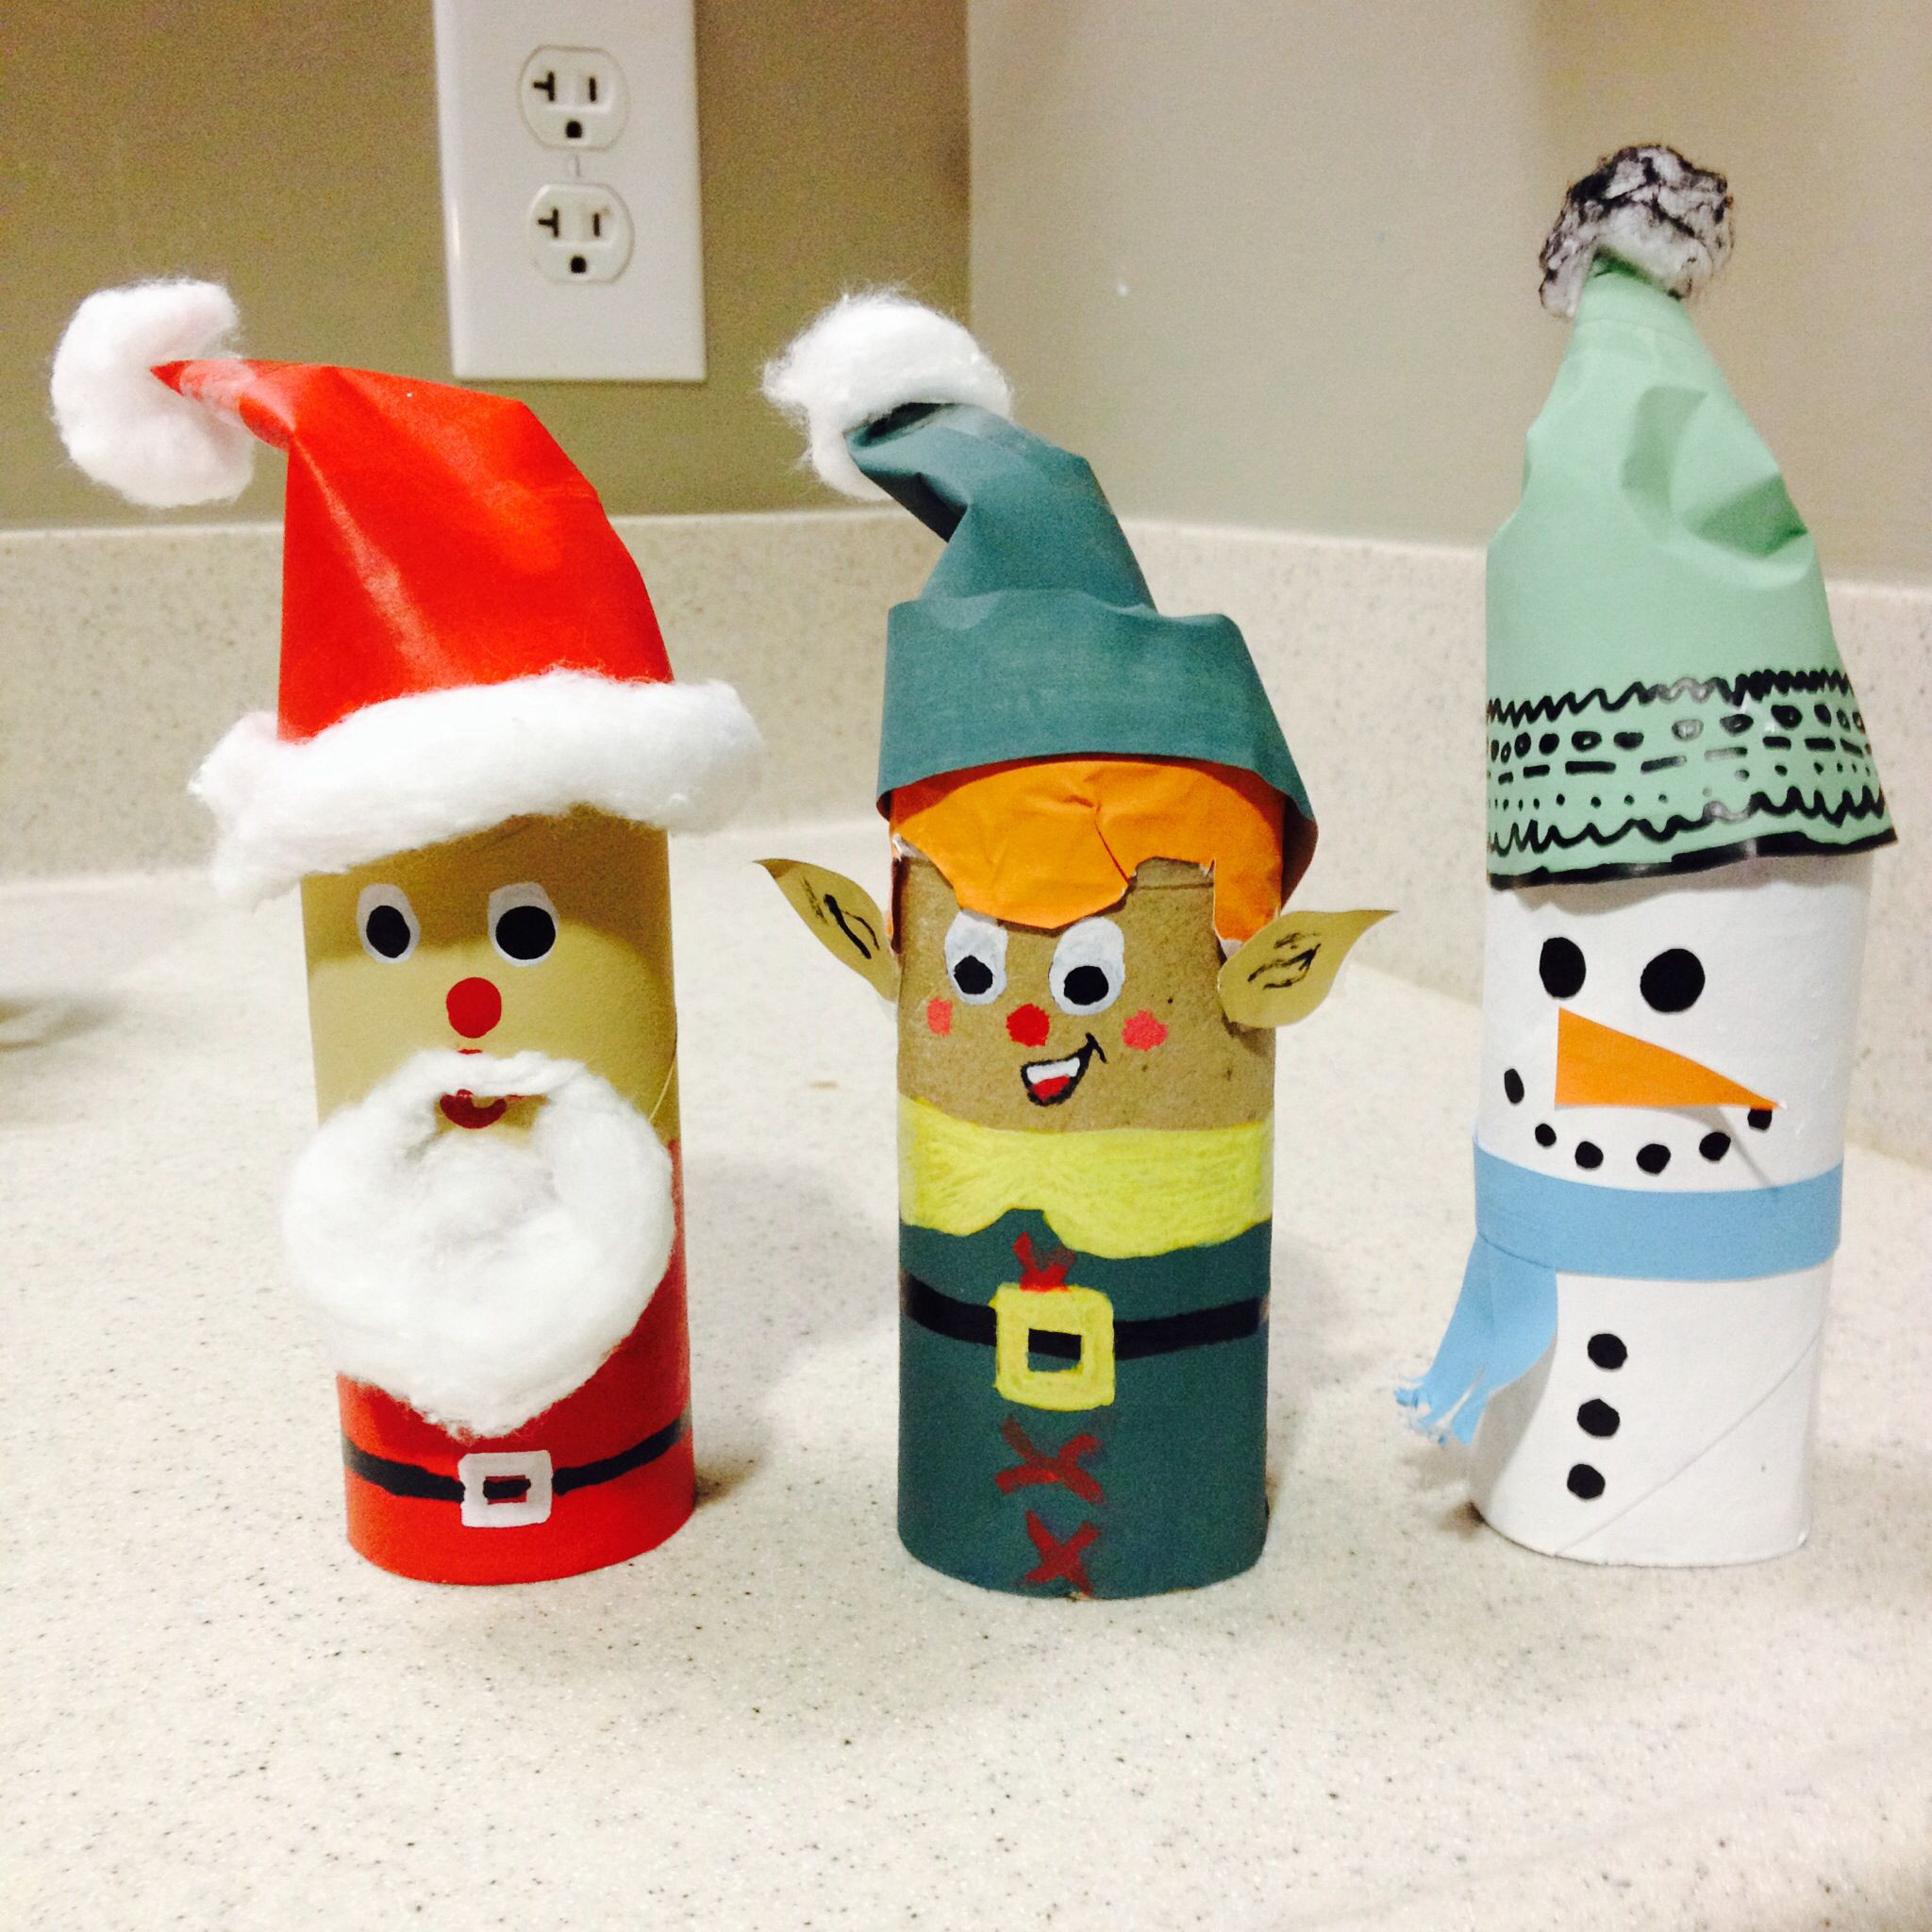 Christmas Toilet Paper
 Toilet paper roll Christmas decorations